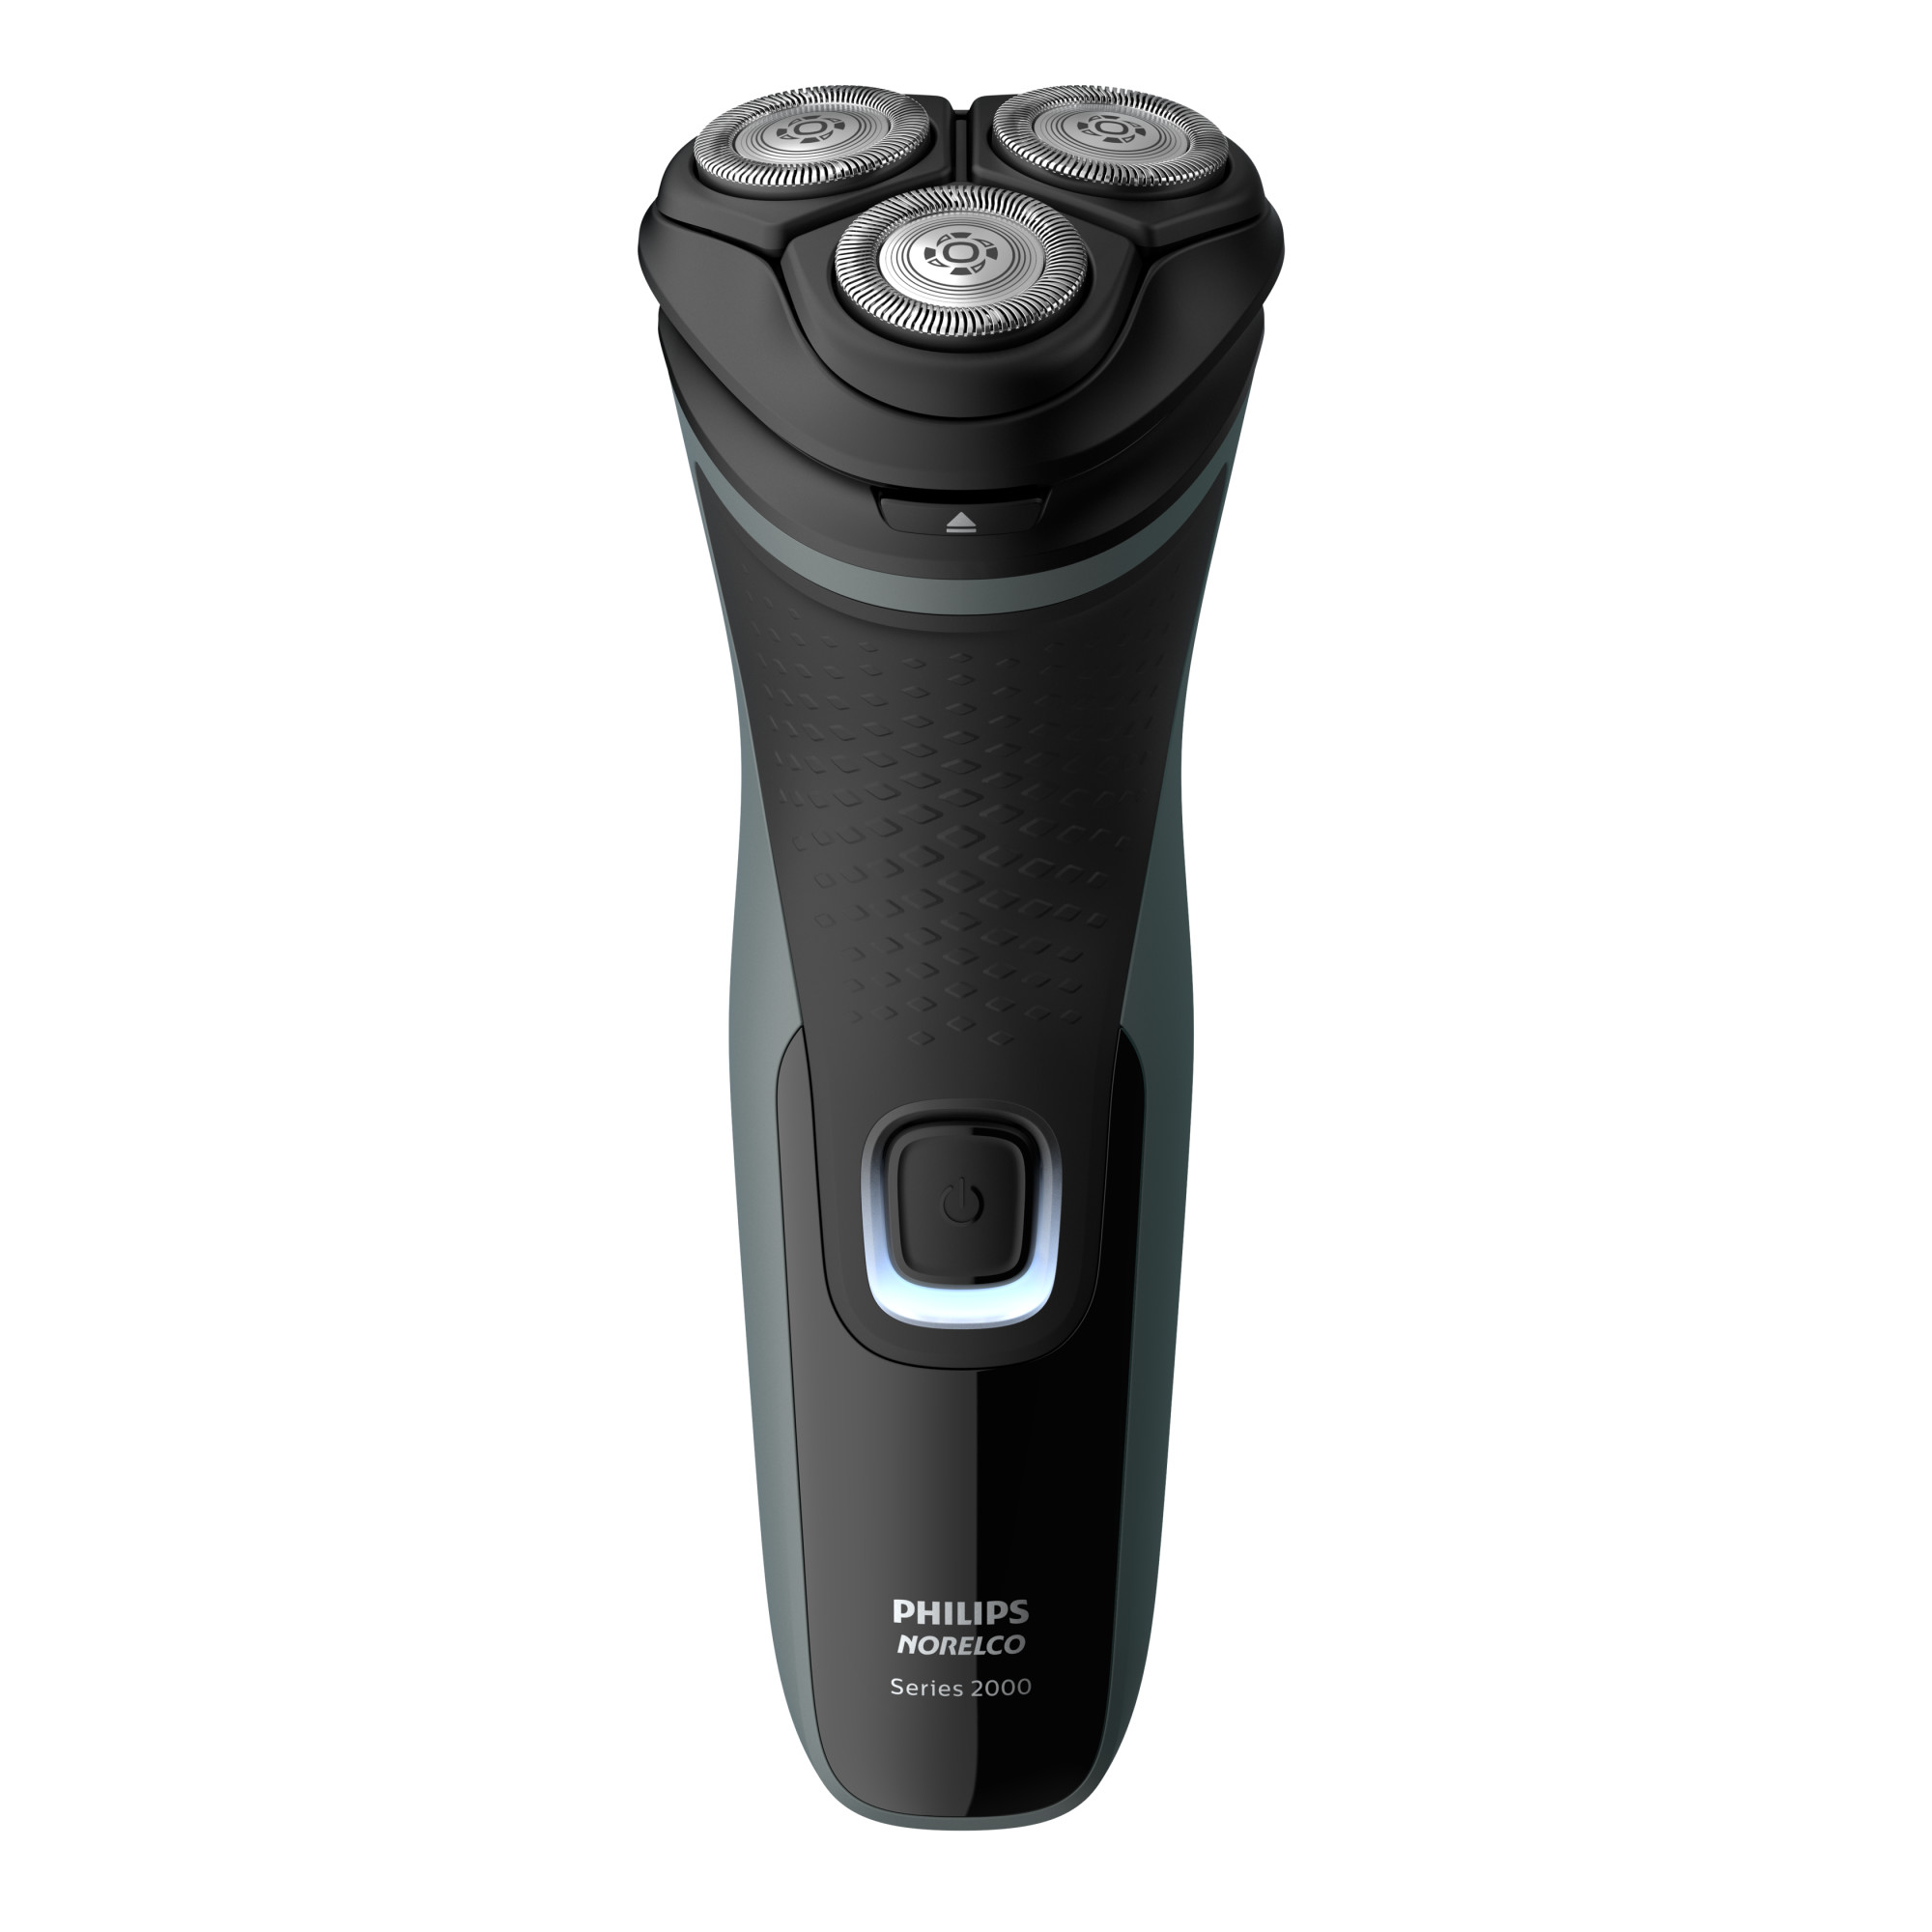 Philips Norelco Shaver 2300, Corded and Rechargeable Cordless Electric Shaver with Pop-Up Trimmer, S1211/81 - image 1 of 12